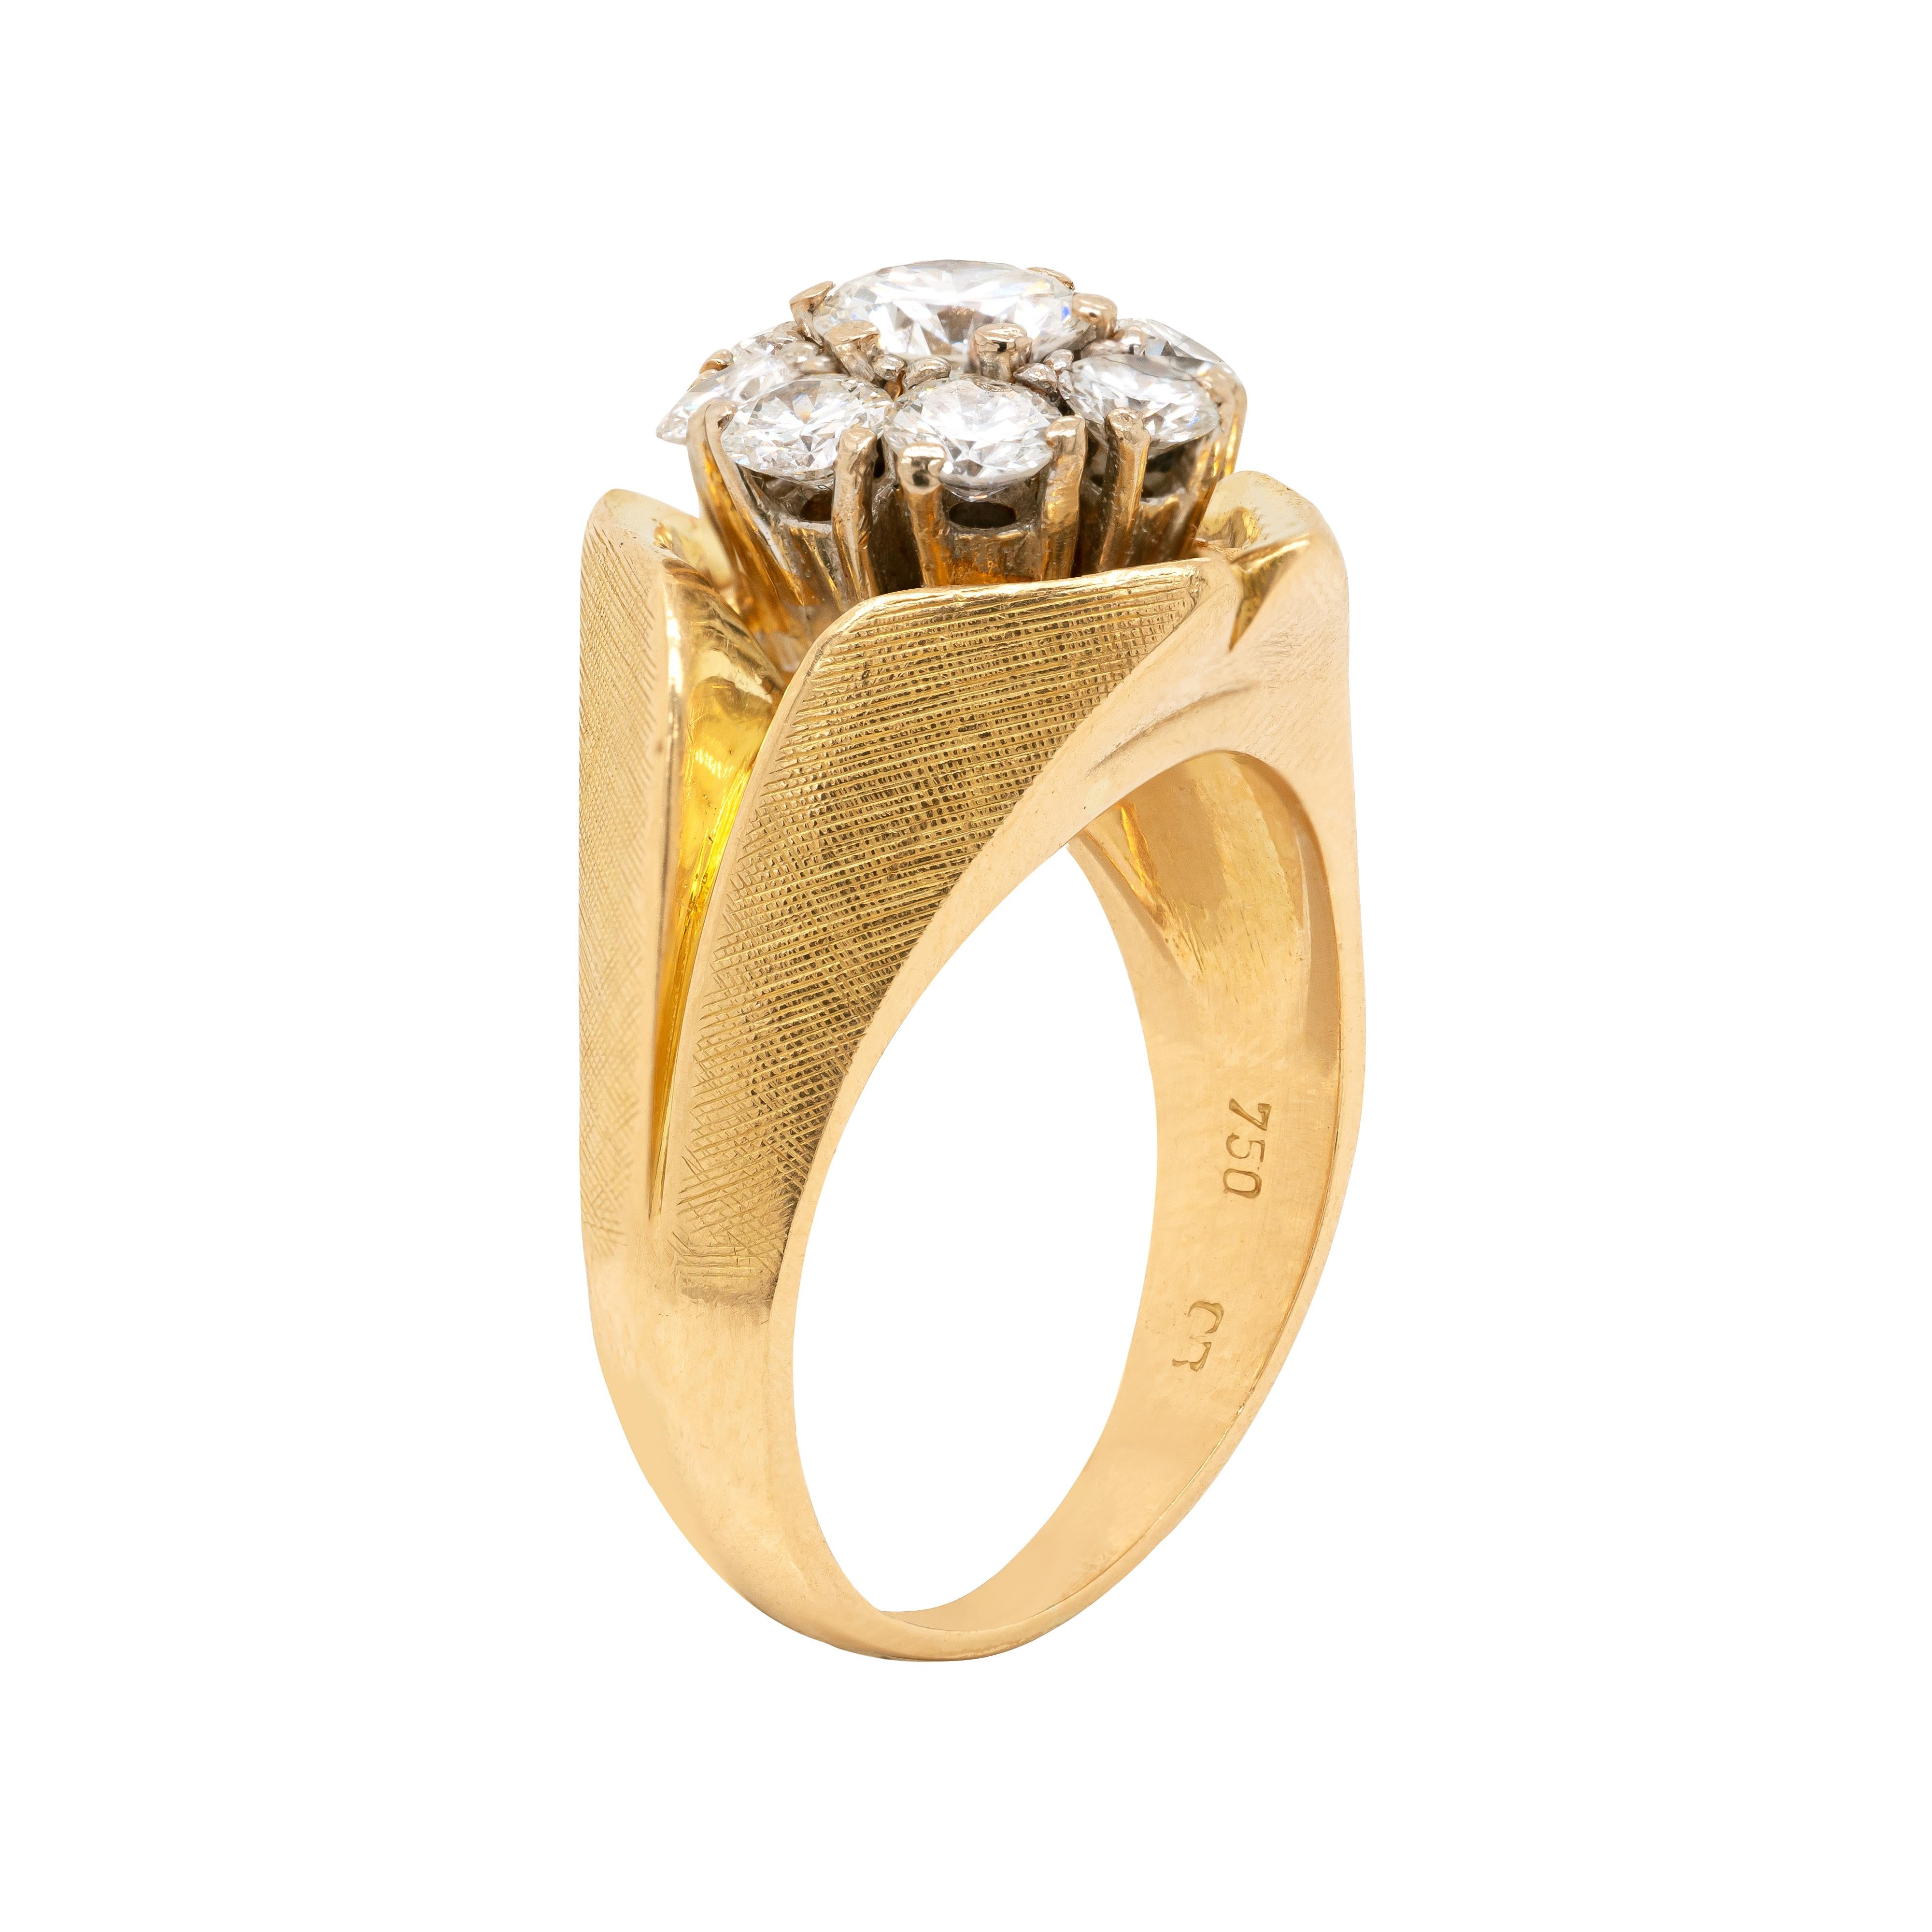 This unusual 18 carat yellow gold ring features a wonderful cluster in the center made of 9 round brilliant cut diamonds, with a total approximate weight of 1.40ct, all claw set in open back settings. The diamond cluster is beautifully set in the